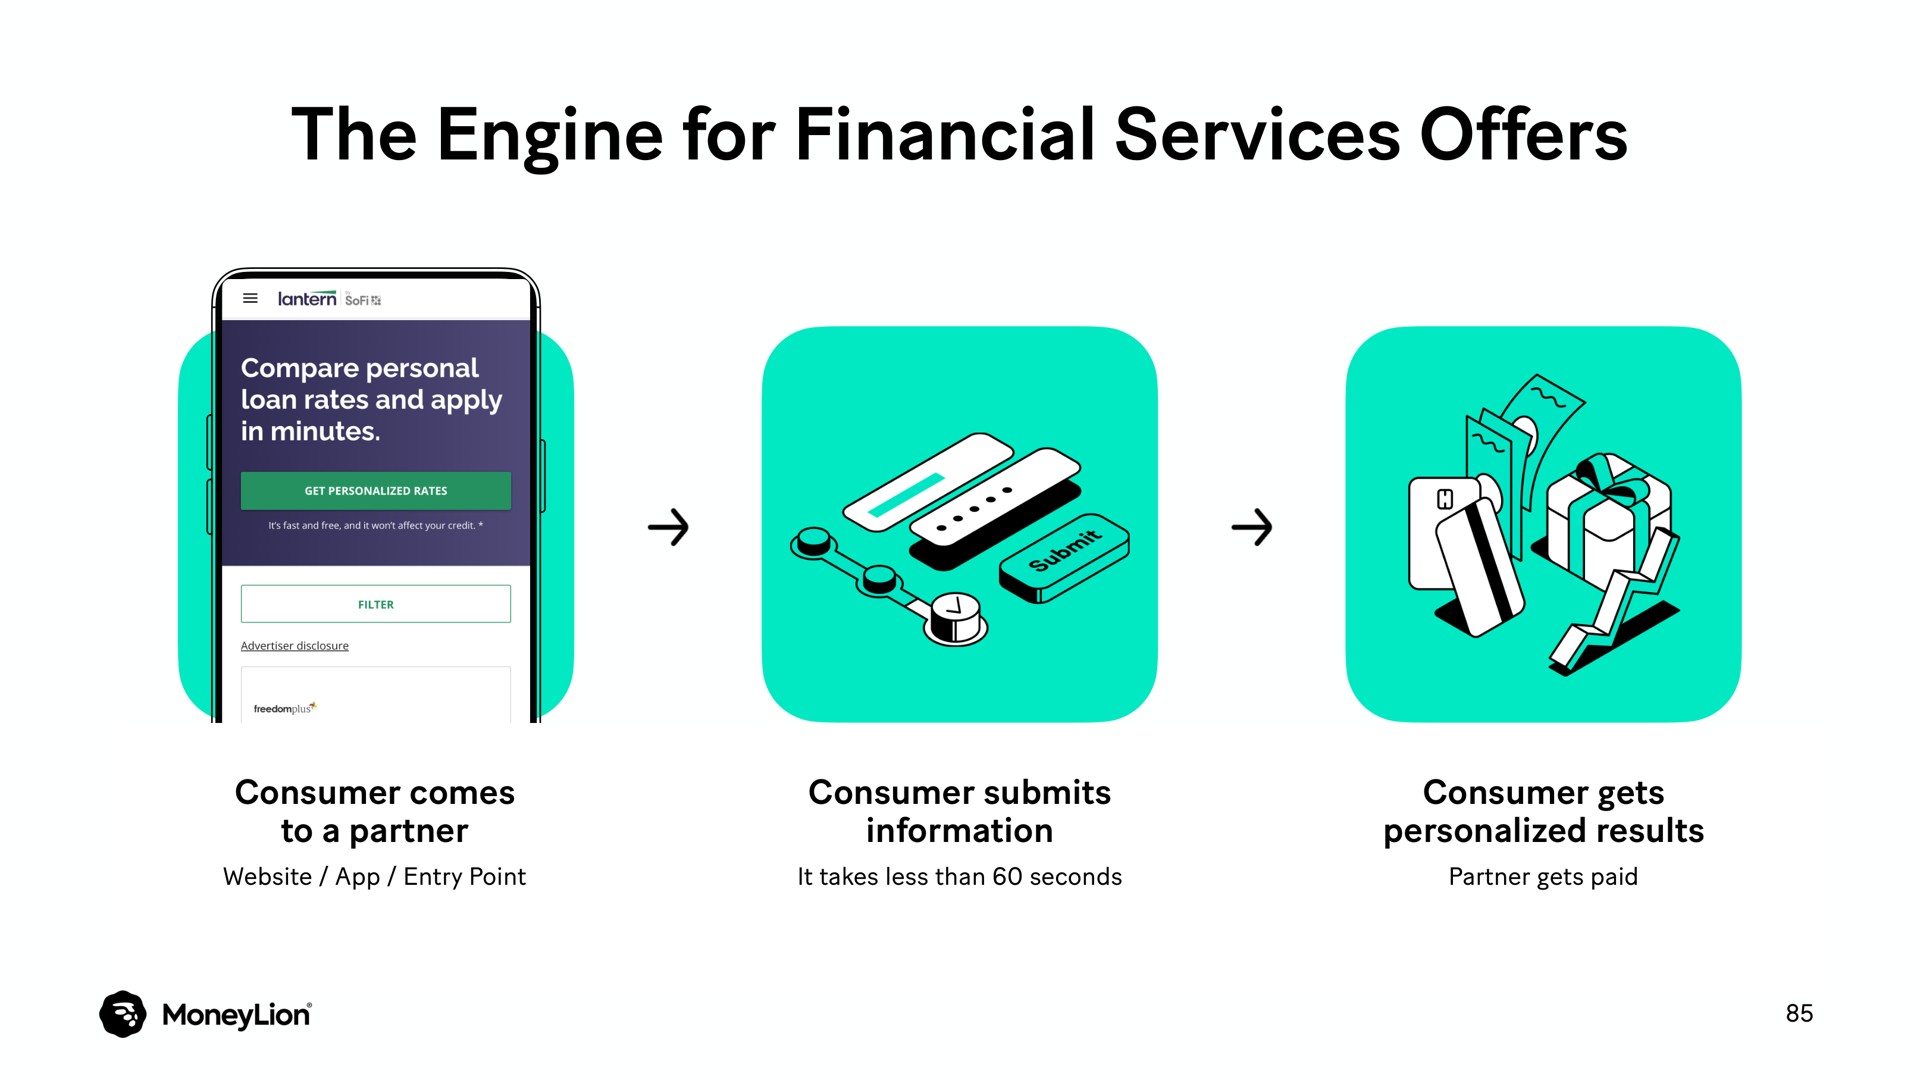 the engine for financial services offers | MoneyLion